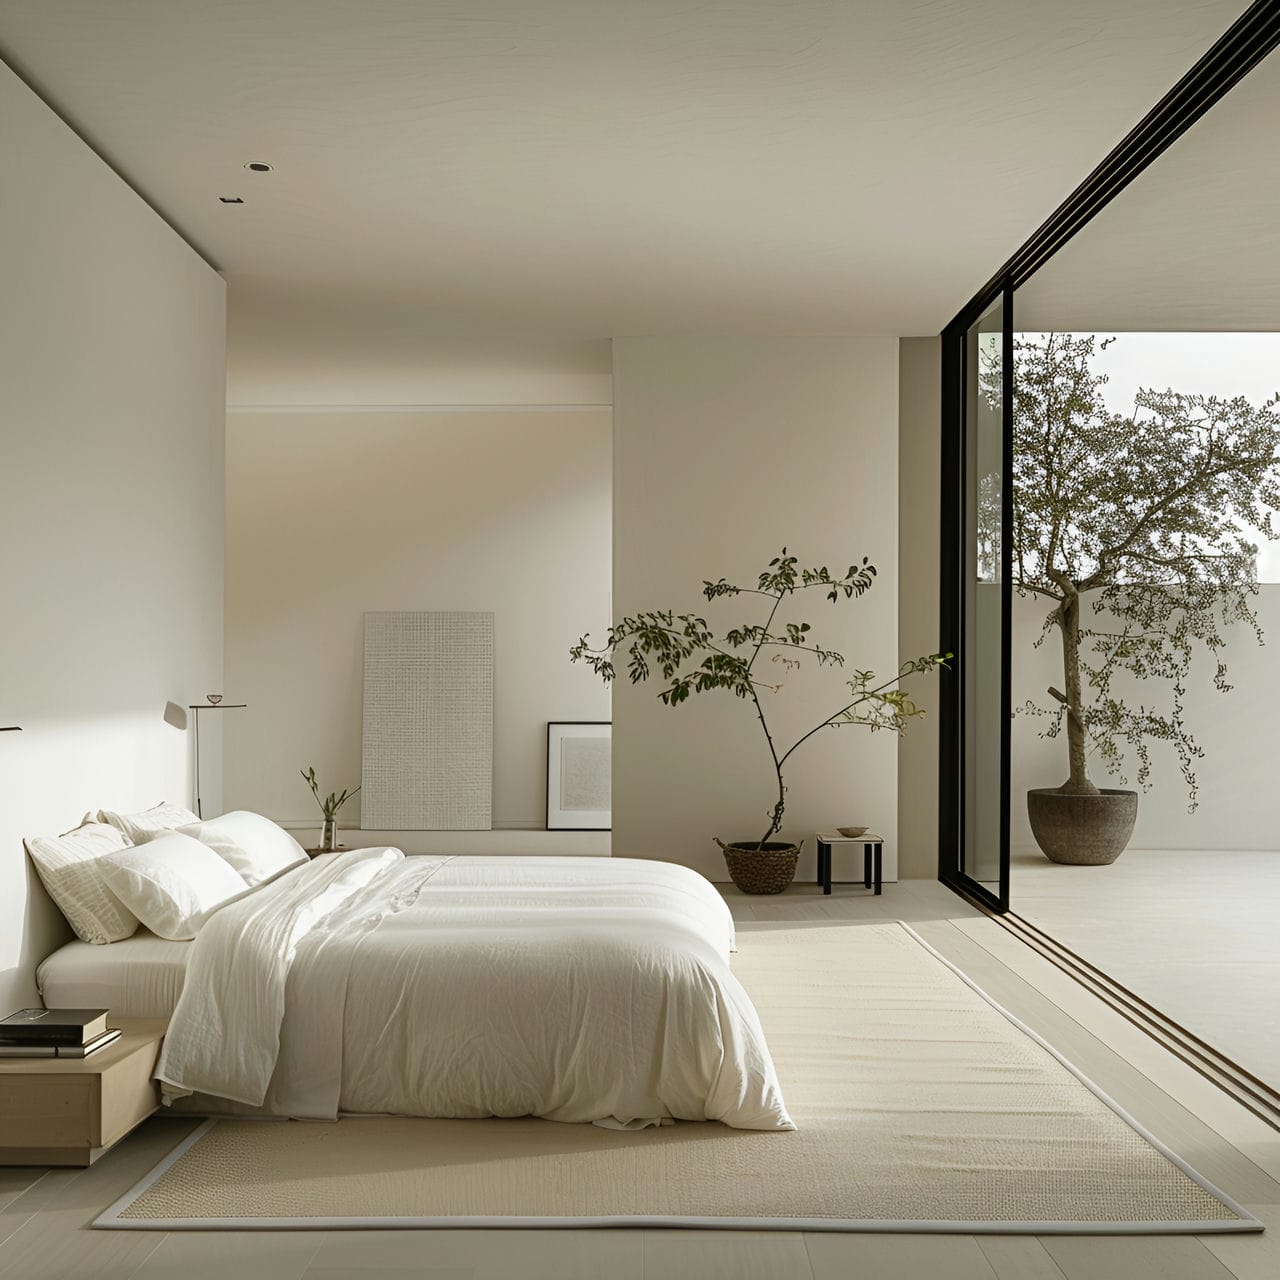 Master bedroom: size, functionality, uses, furniture and renovation